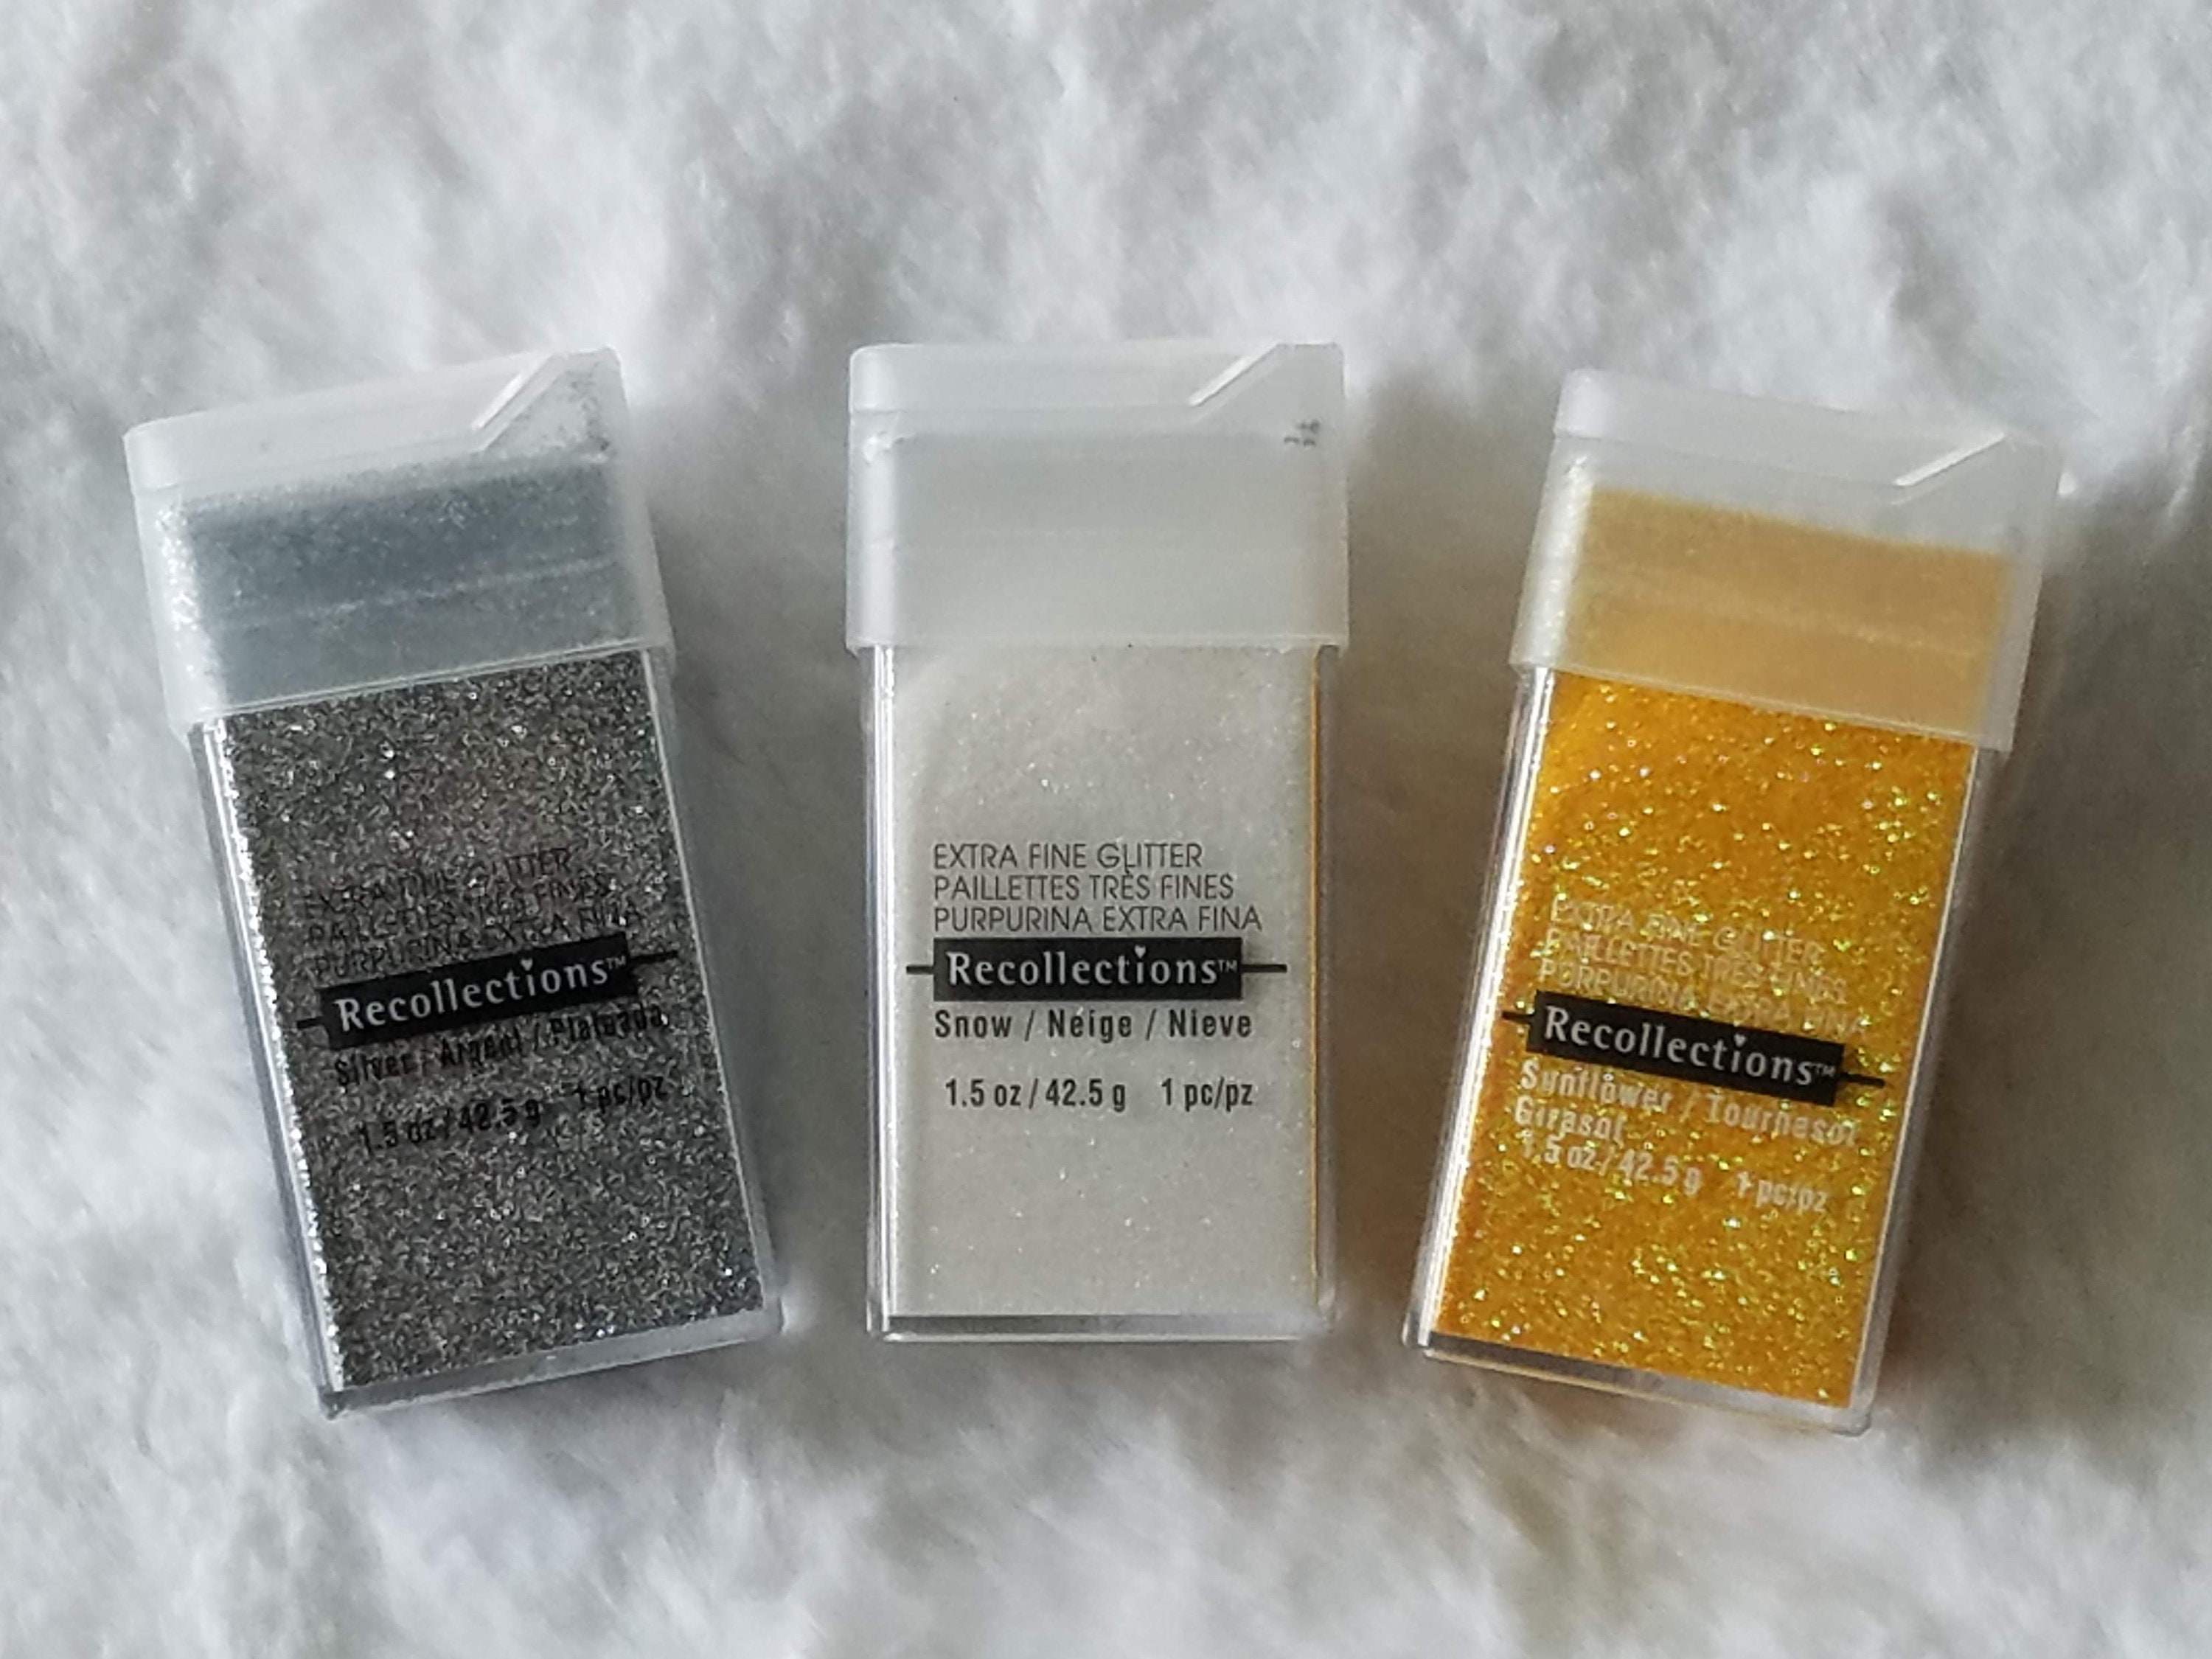 Recollections Extra Fine Glitter - 4.5 oz